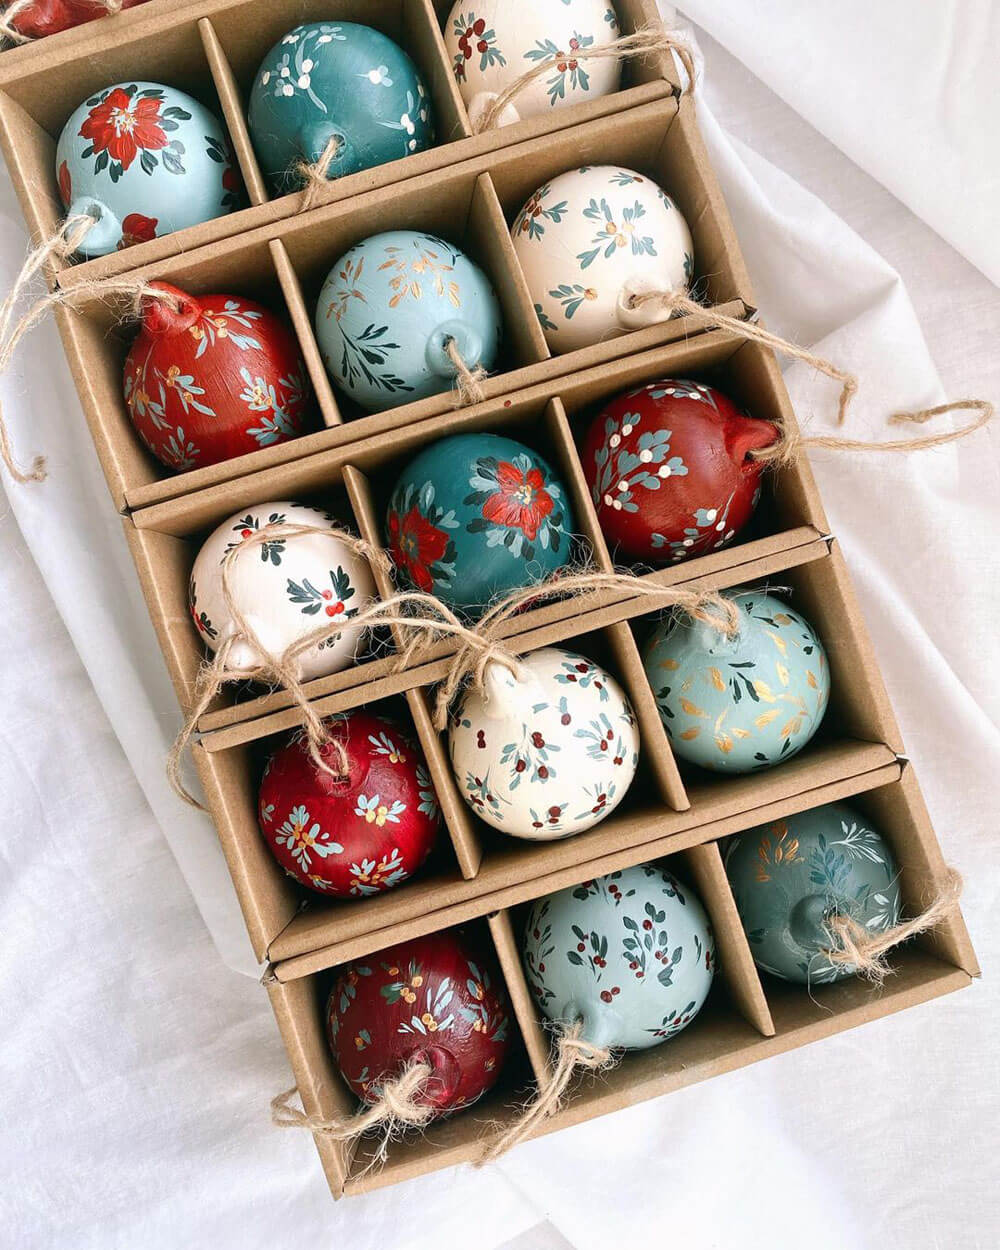 hand painted ornaments by lucy siviter